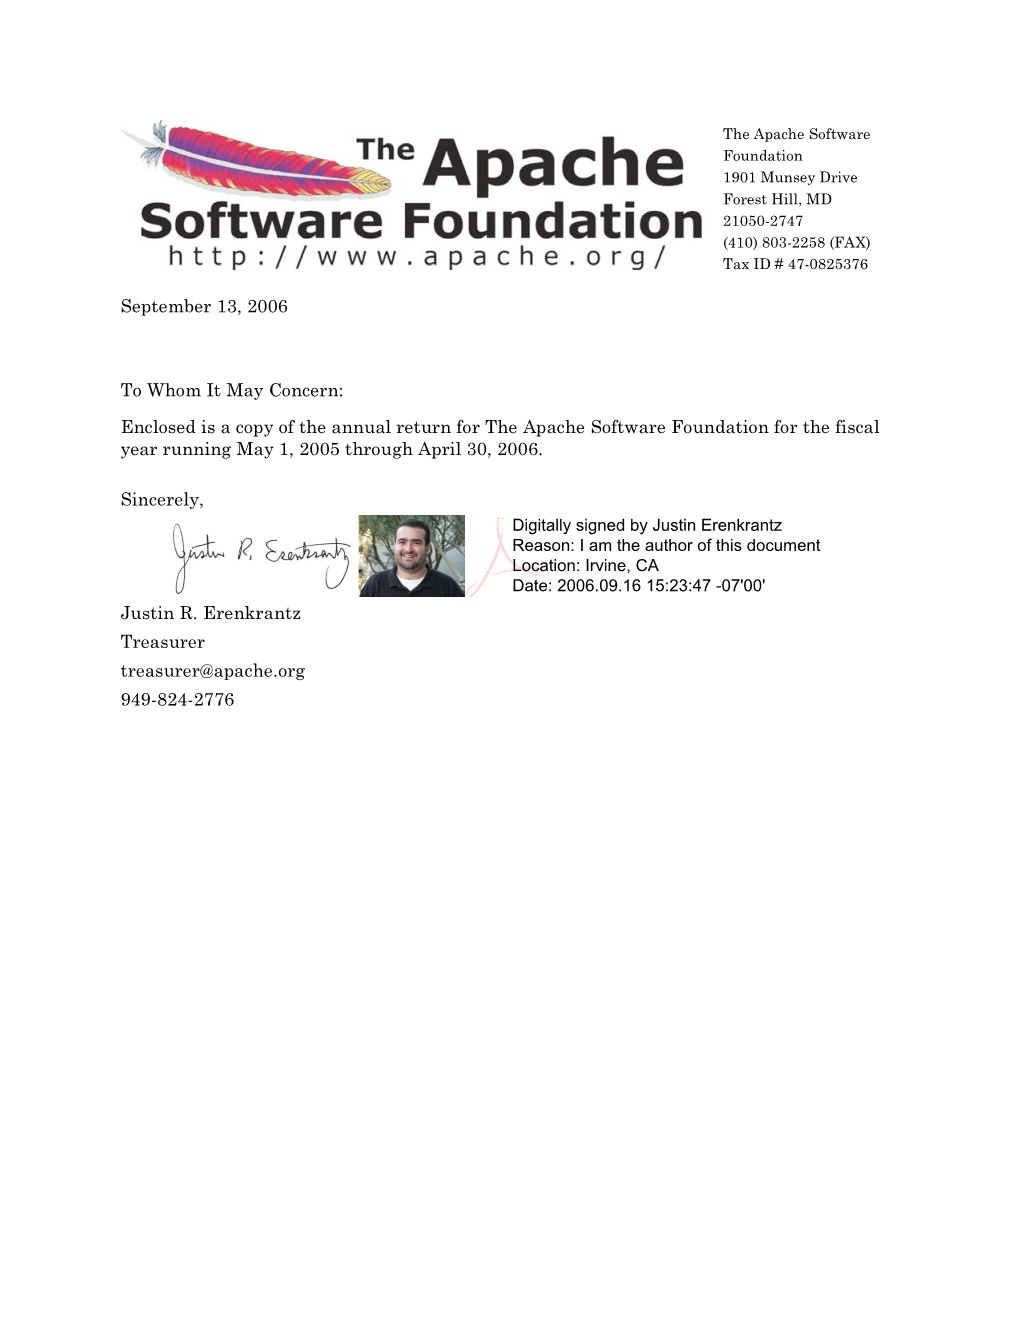 2005-2006 Fiscal Year Return for the Apache Software Foundation